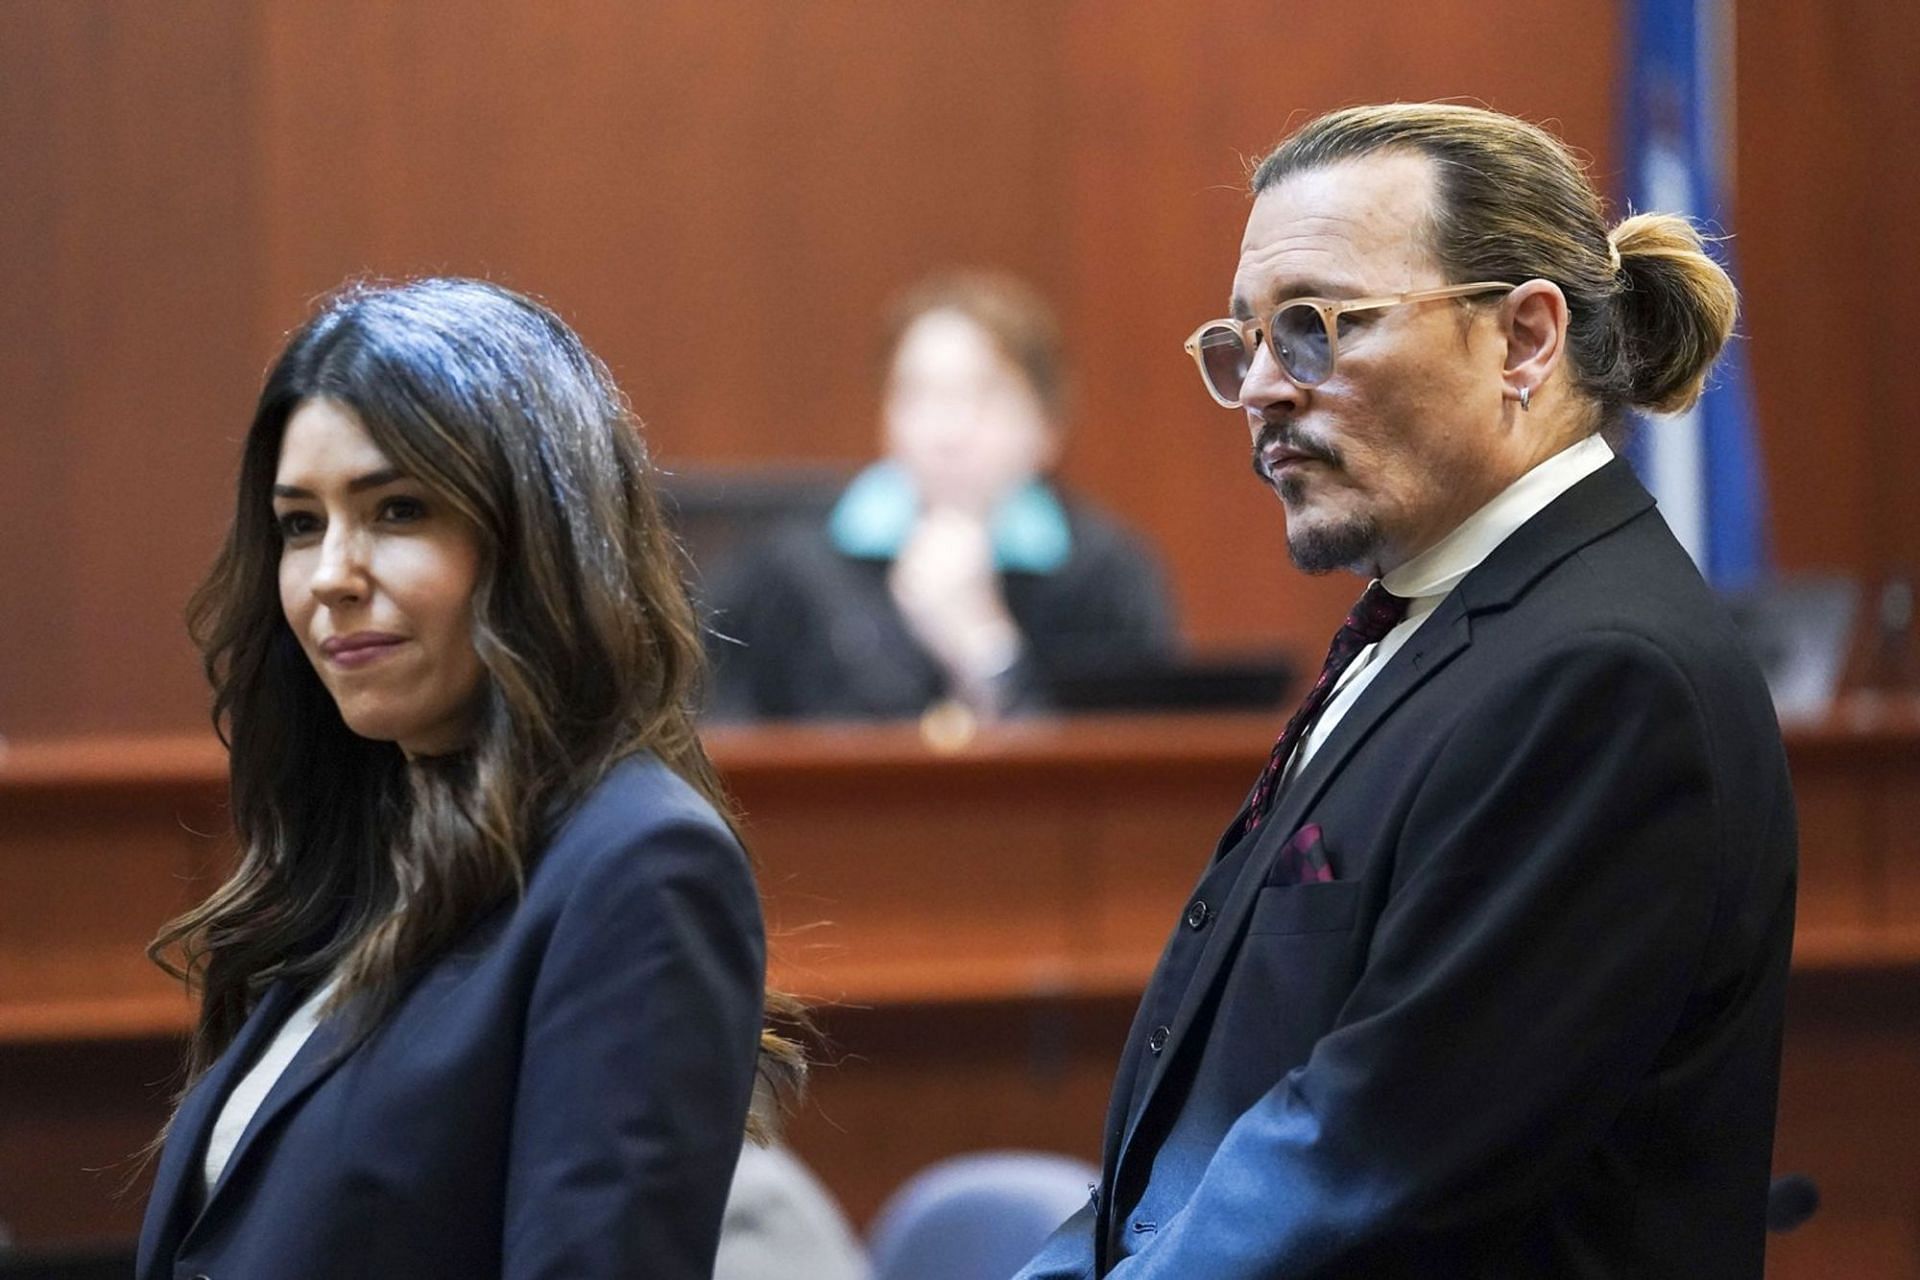 Camille Vasquez receives several offers from Hollywood law firms after defamation trial victory (Image via AP)